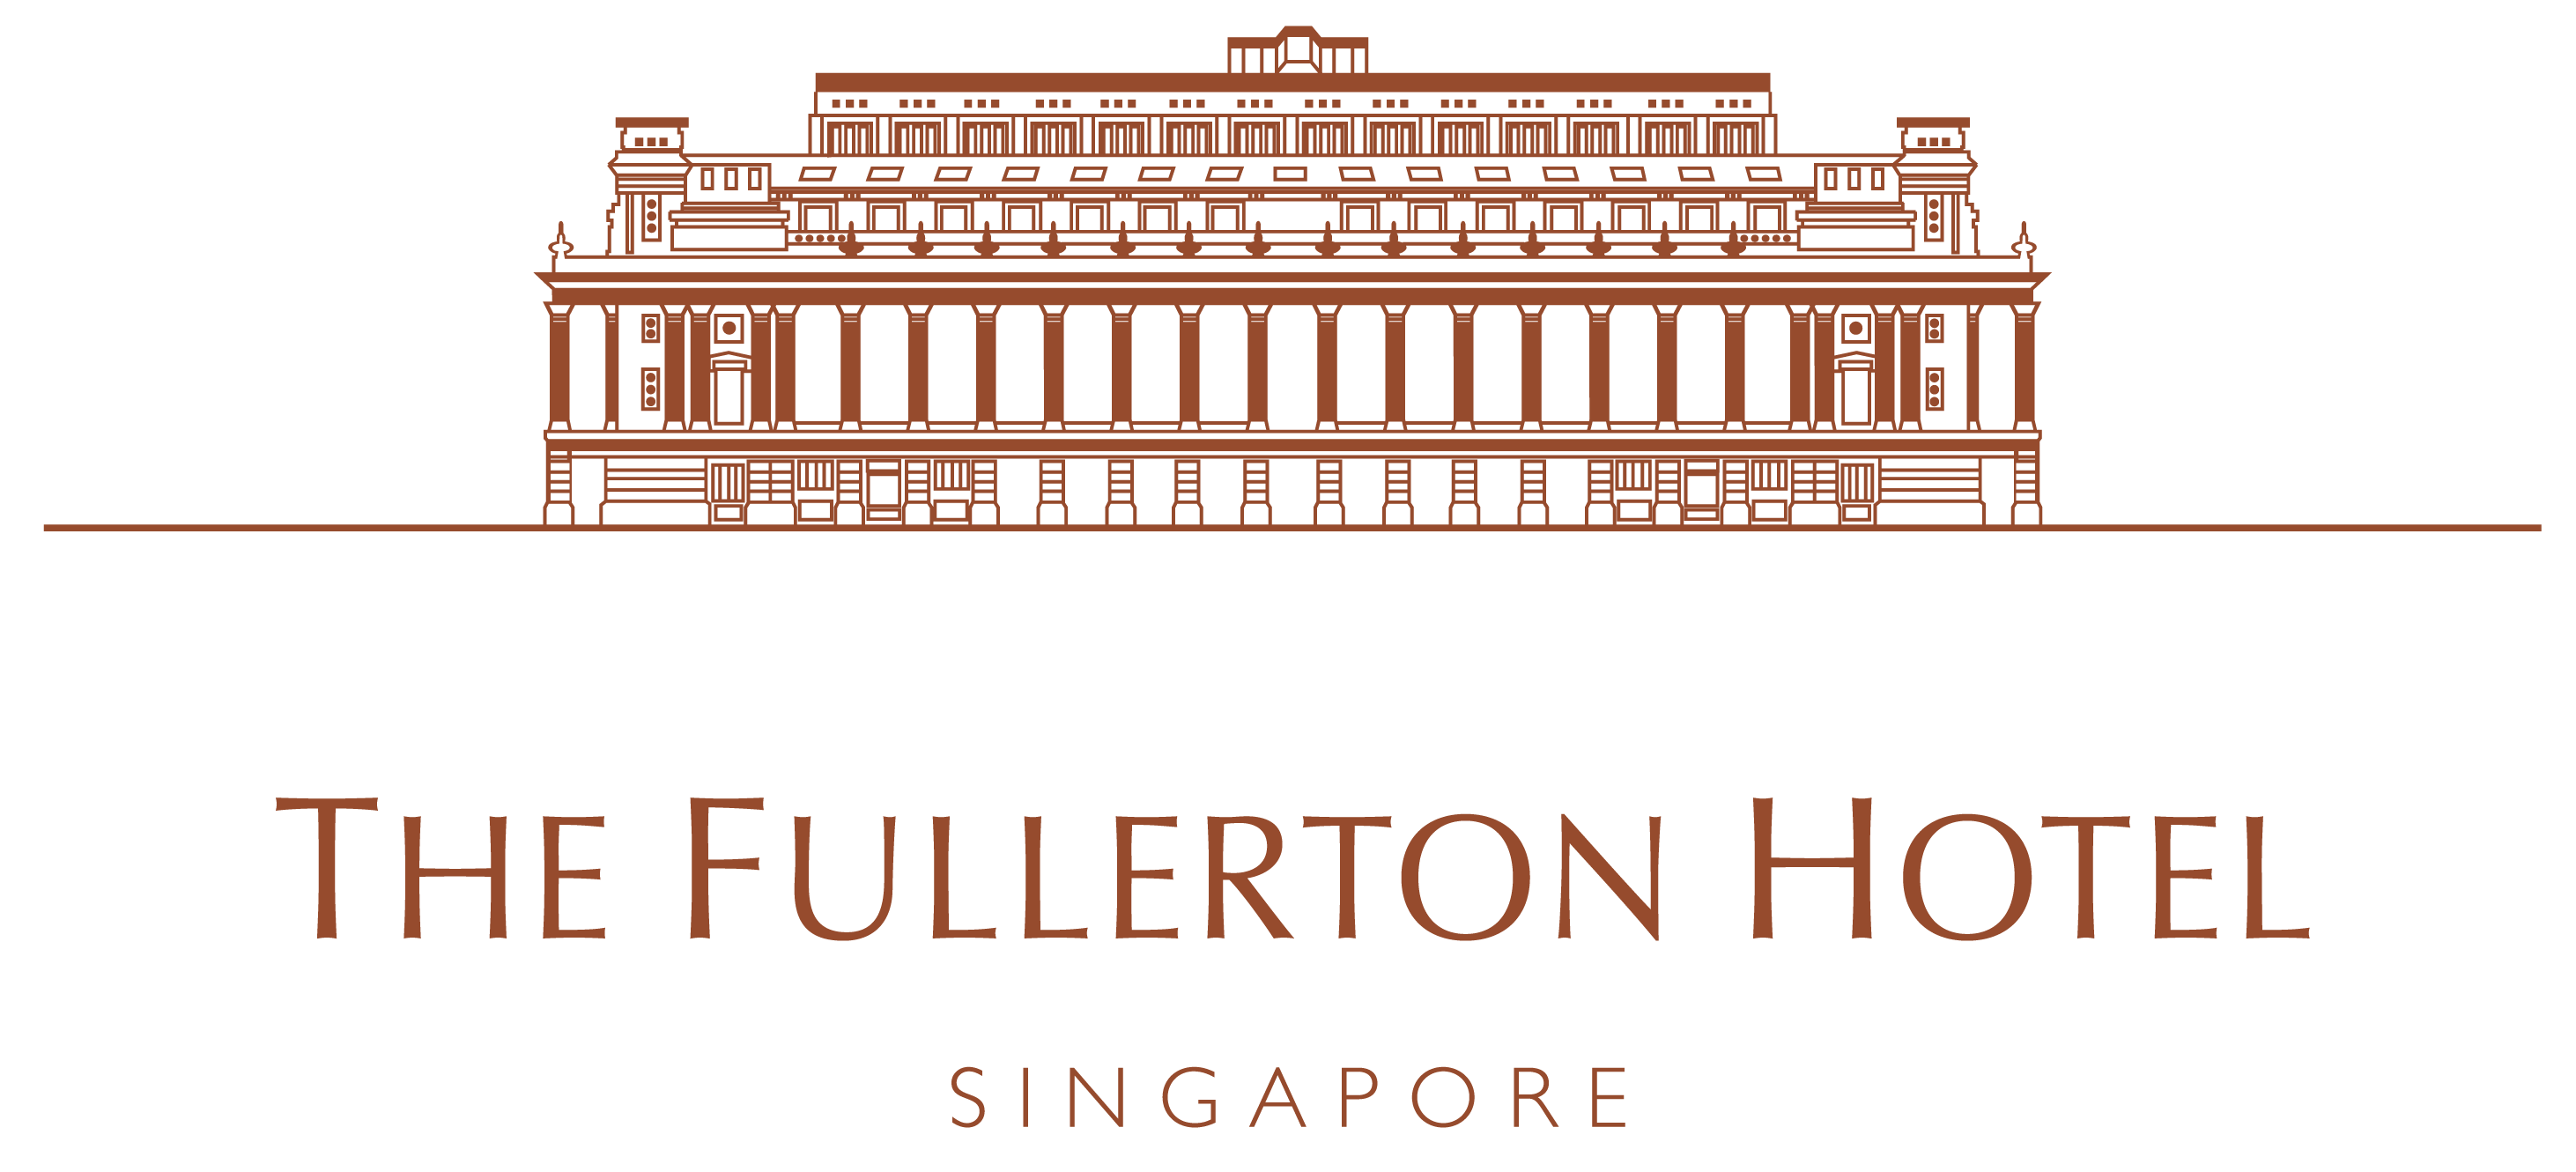 The Fullerton Hotel Singapore | The 5 Star Iconic Hotel in Singapore